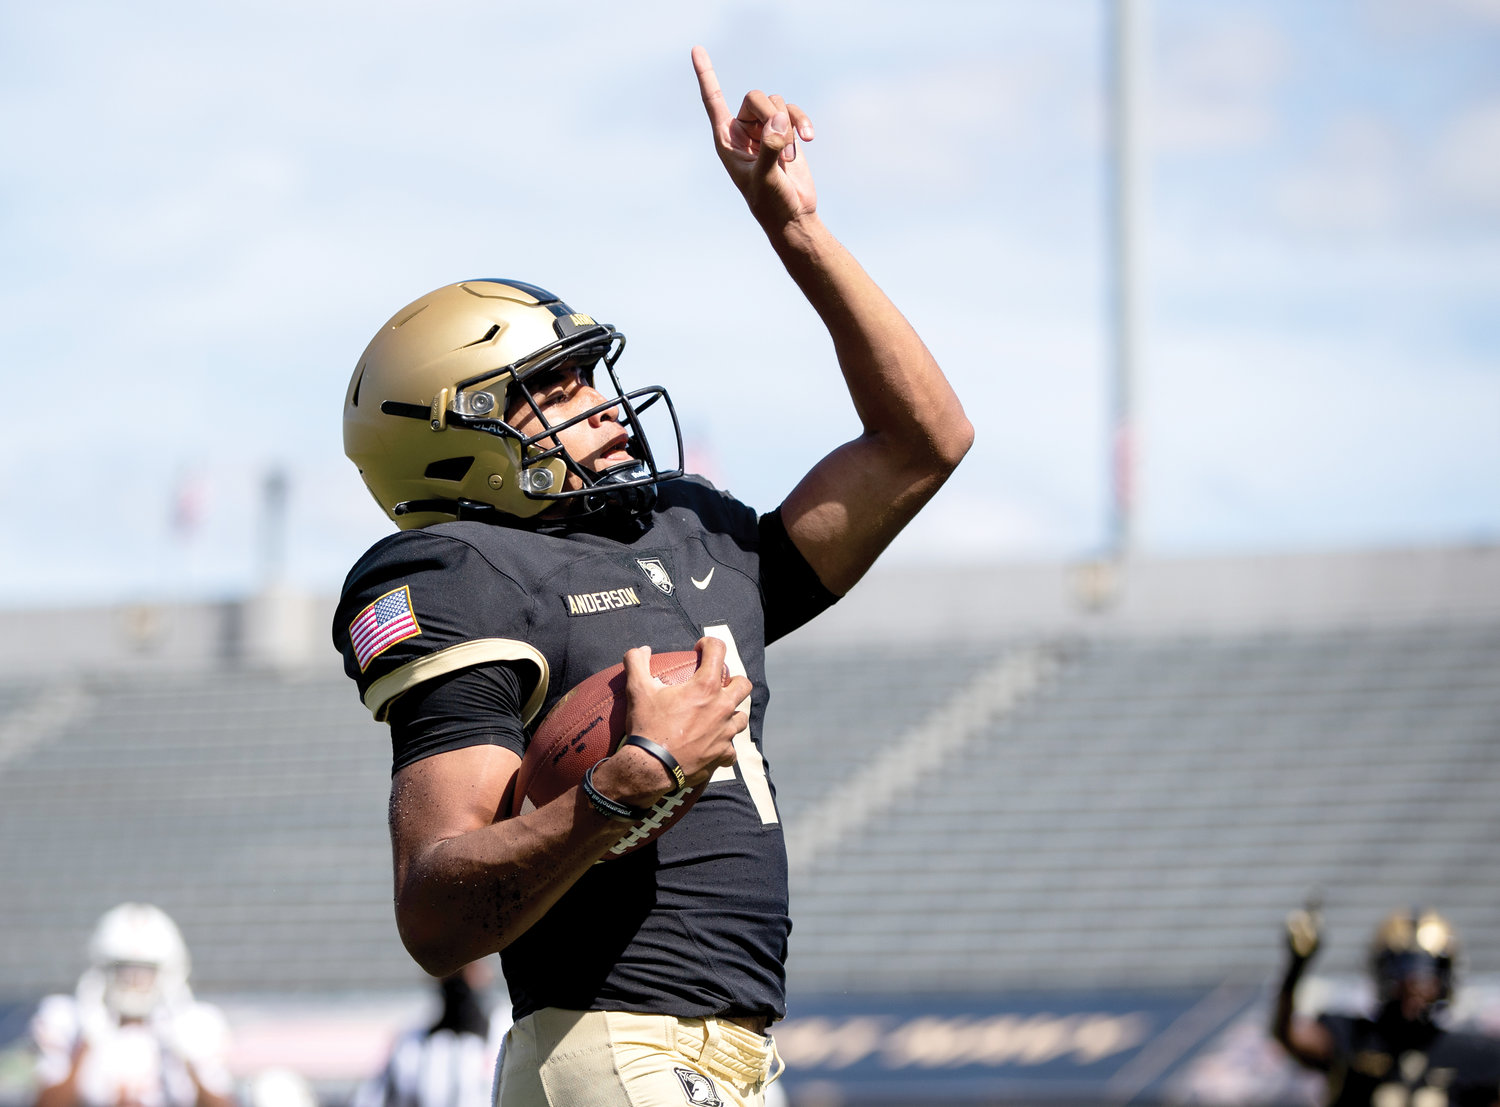 Cardinal Hayes High School graduate Christian Anderson scores one of his two touchdowns in Army’s 37-7 victory over Louisiana-Monroe at West Point Sept. 12. The junior quarterback ran for 98 yards to pace an Army offense that finished with 439 rushing yards.